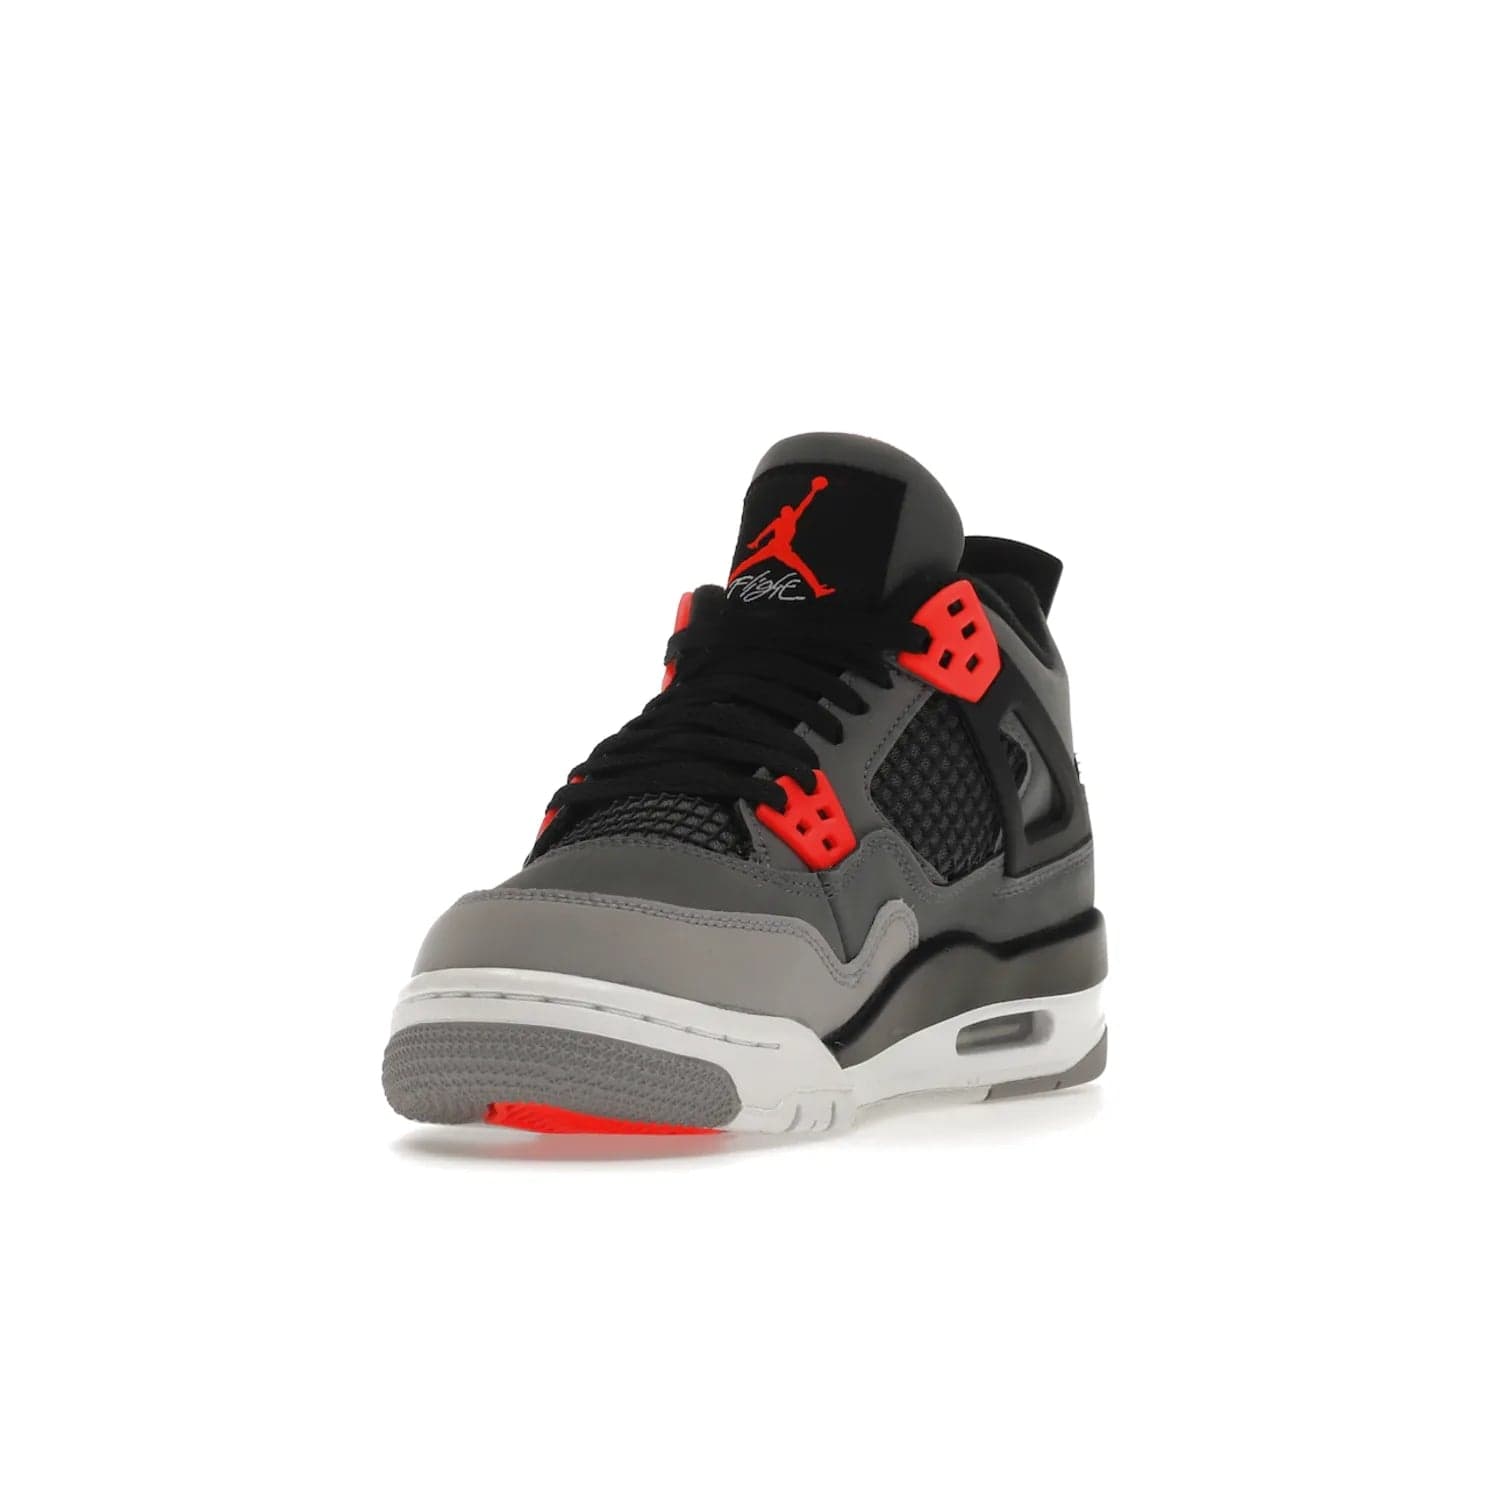 Jordan 4 Retro Infrared (GS) - Image 13 - Only at www.BallersClubKickz.com - Shop the Air Jordan 4 Retro Infrared (GS) for a classic silhouette with subtle yet bold features. Dark grey nubuck upper with lighter forefoot overlay, black accents, Infrared molded eyelets & woven tongue tag. Available June 2022.